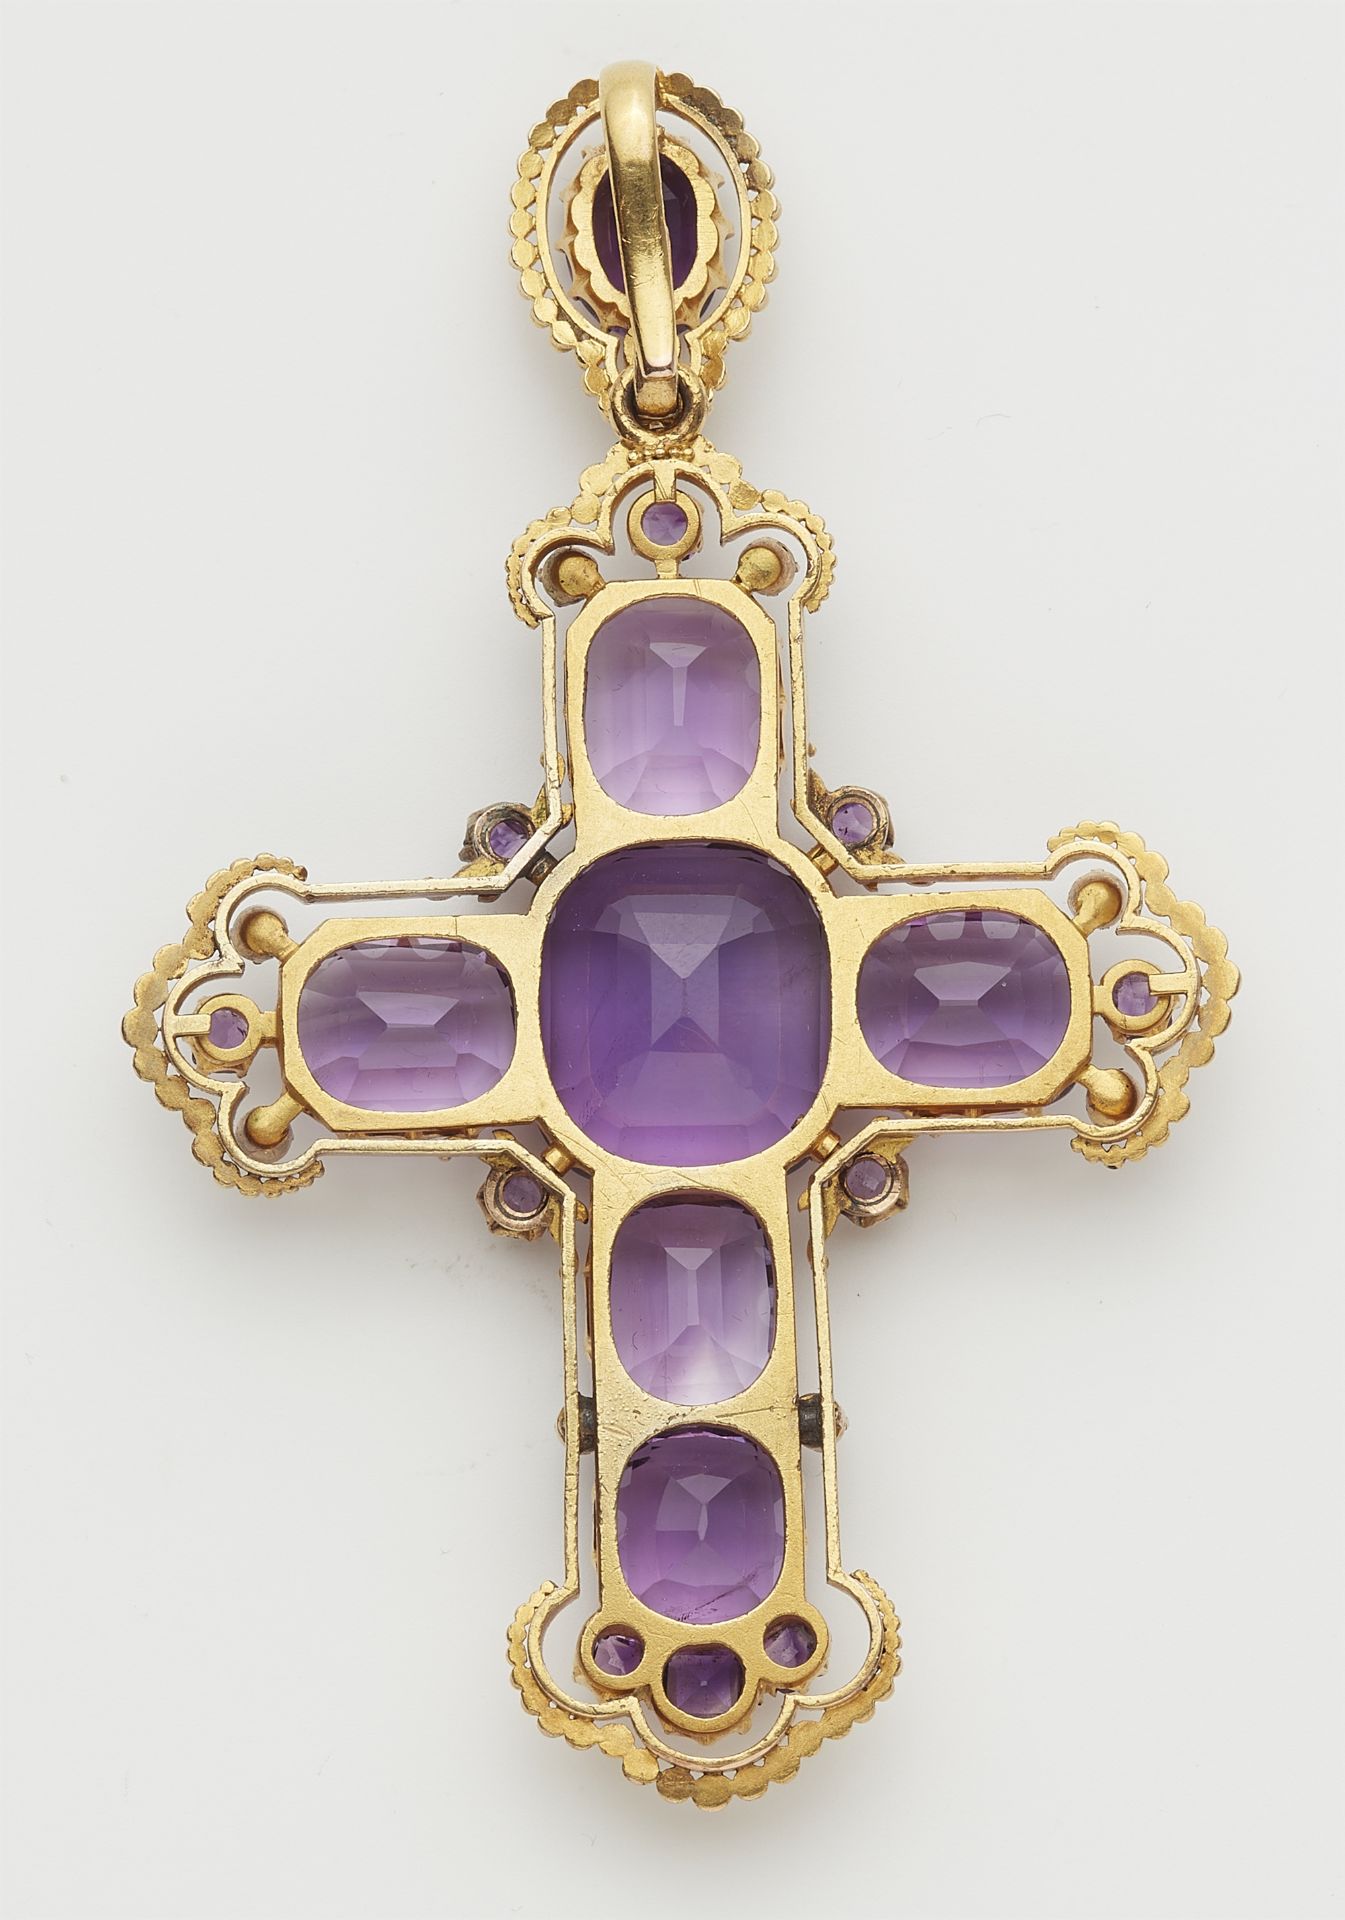 A historicist 14k gold and amethyst pectoral cross pendant. - Image 2 of 2